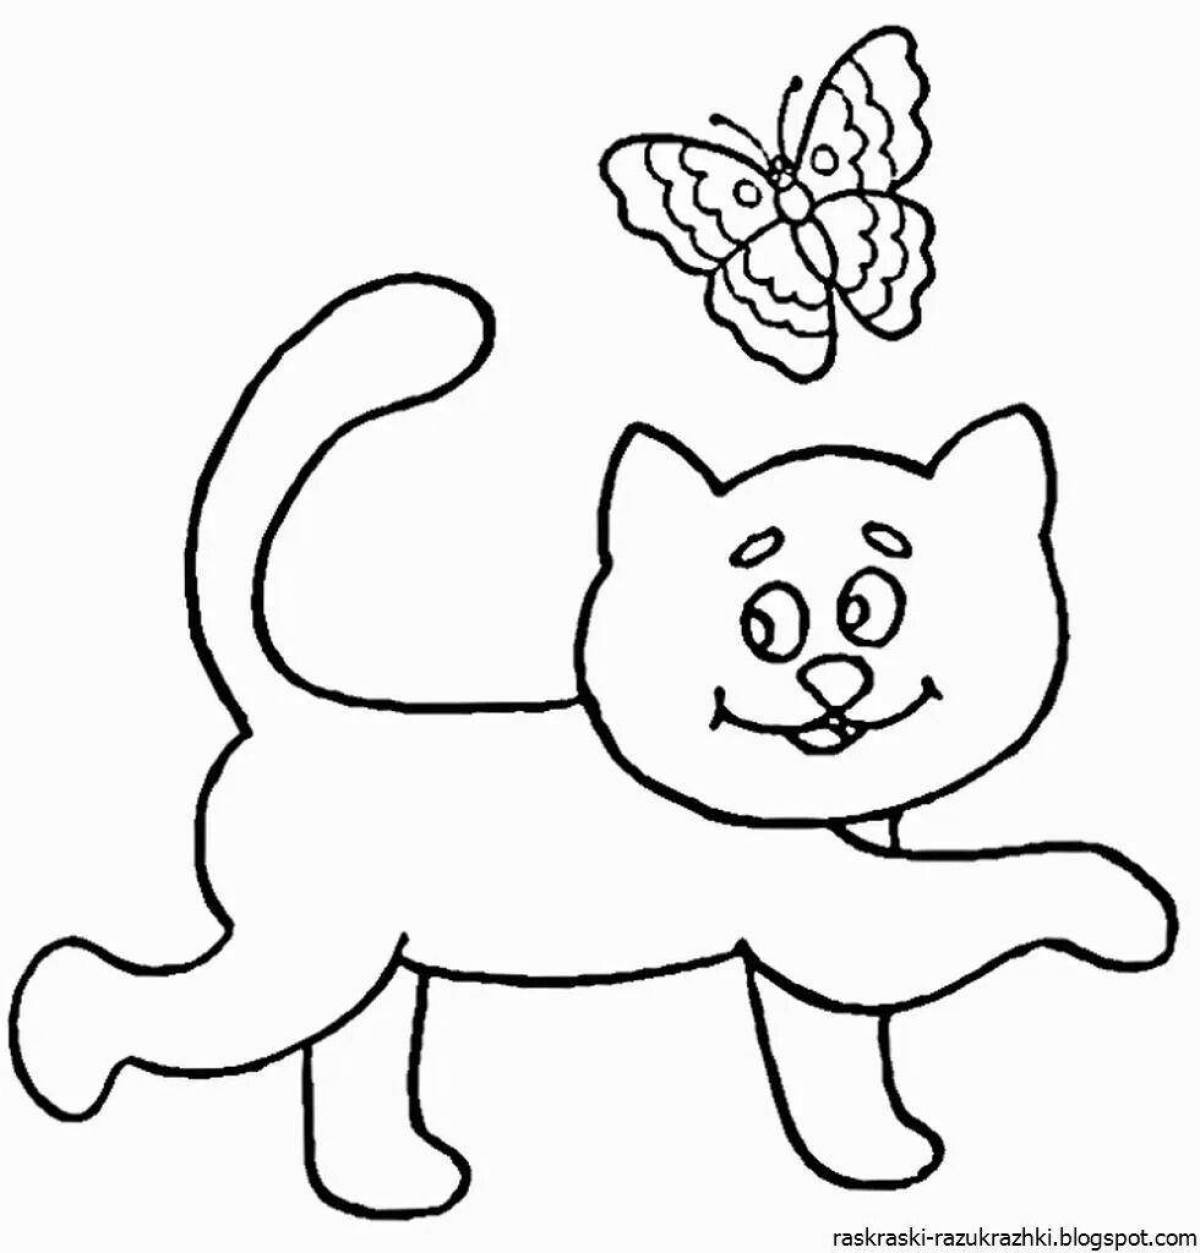 Snuggly kitten coloring book for 2-3 year olds